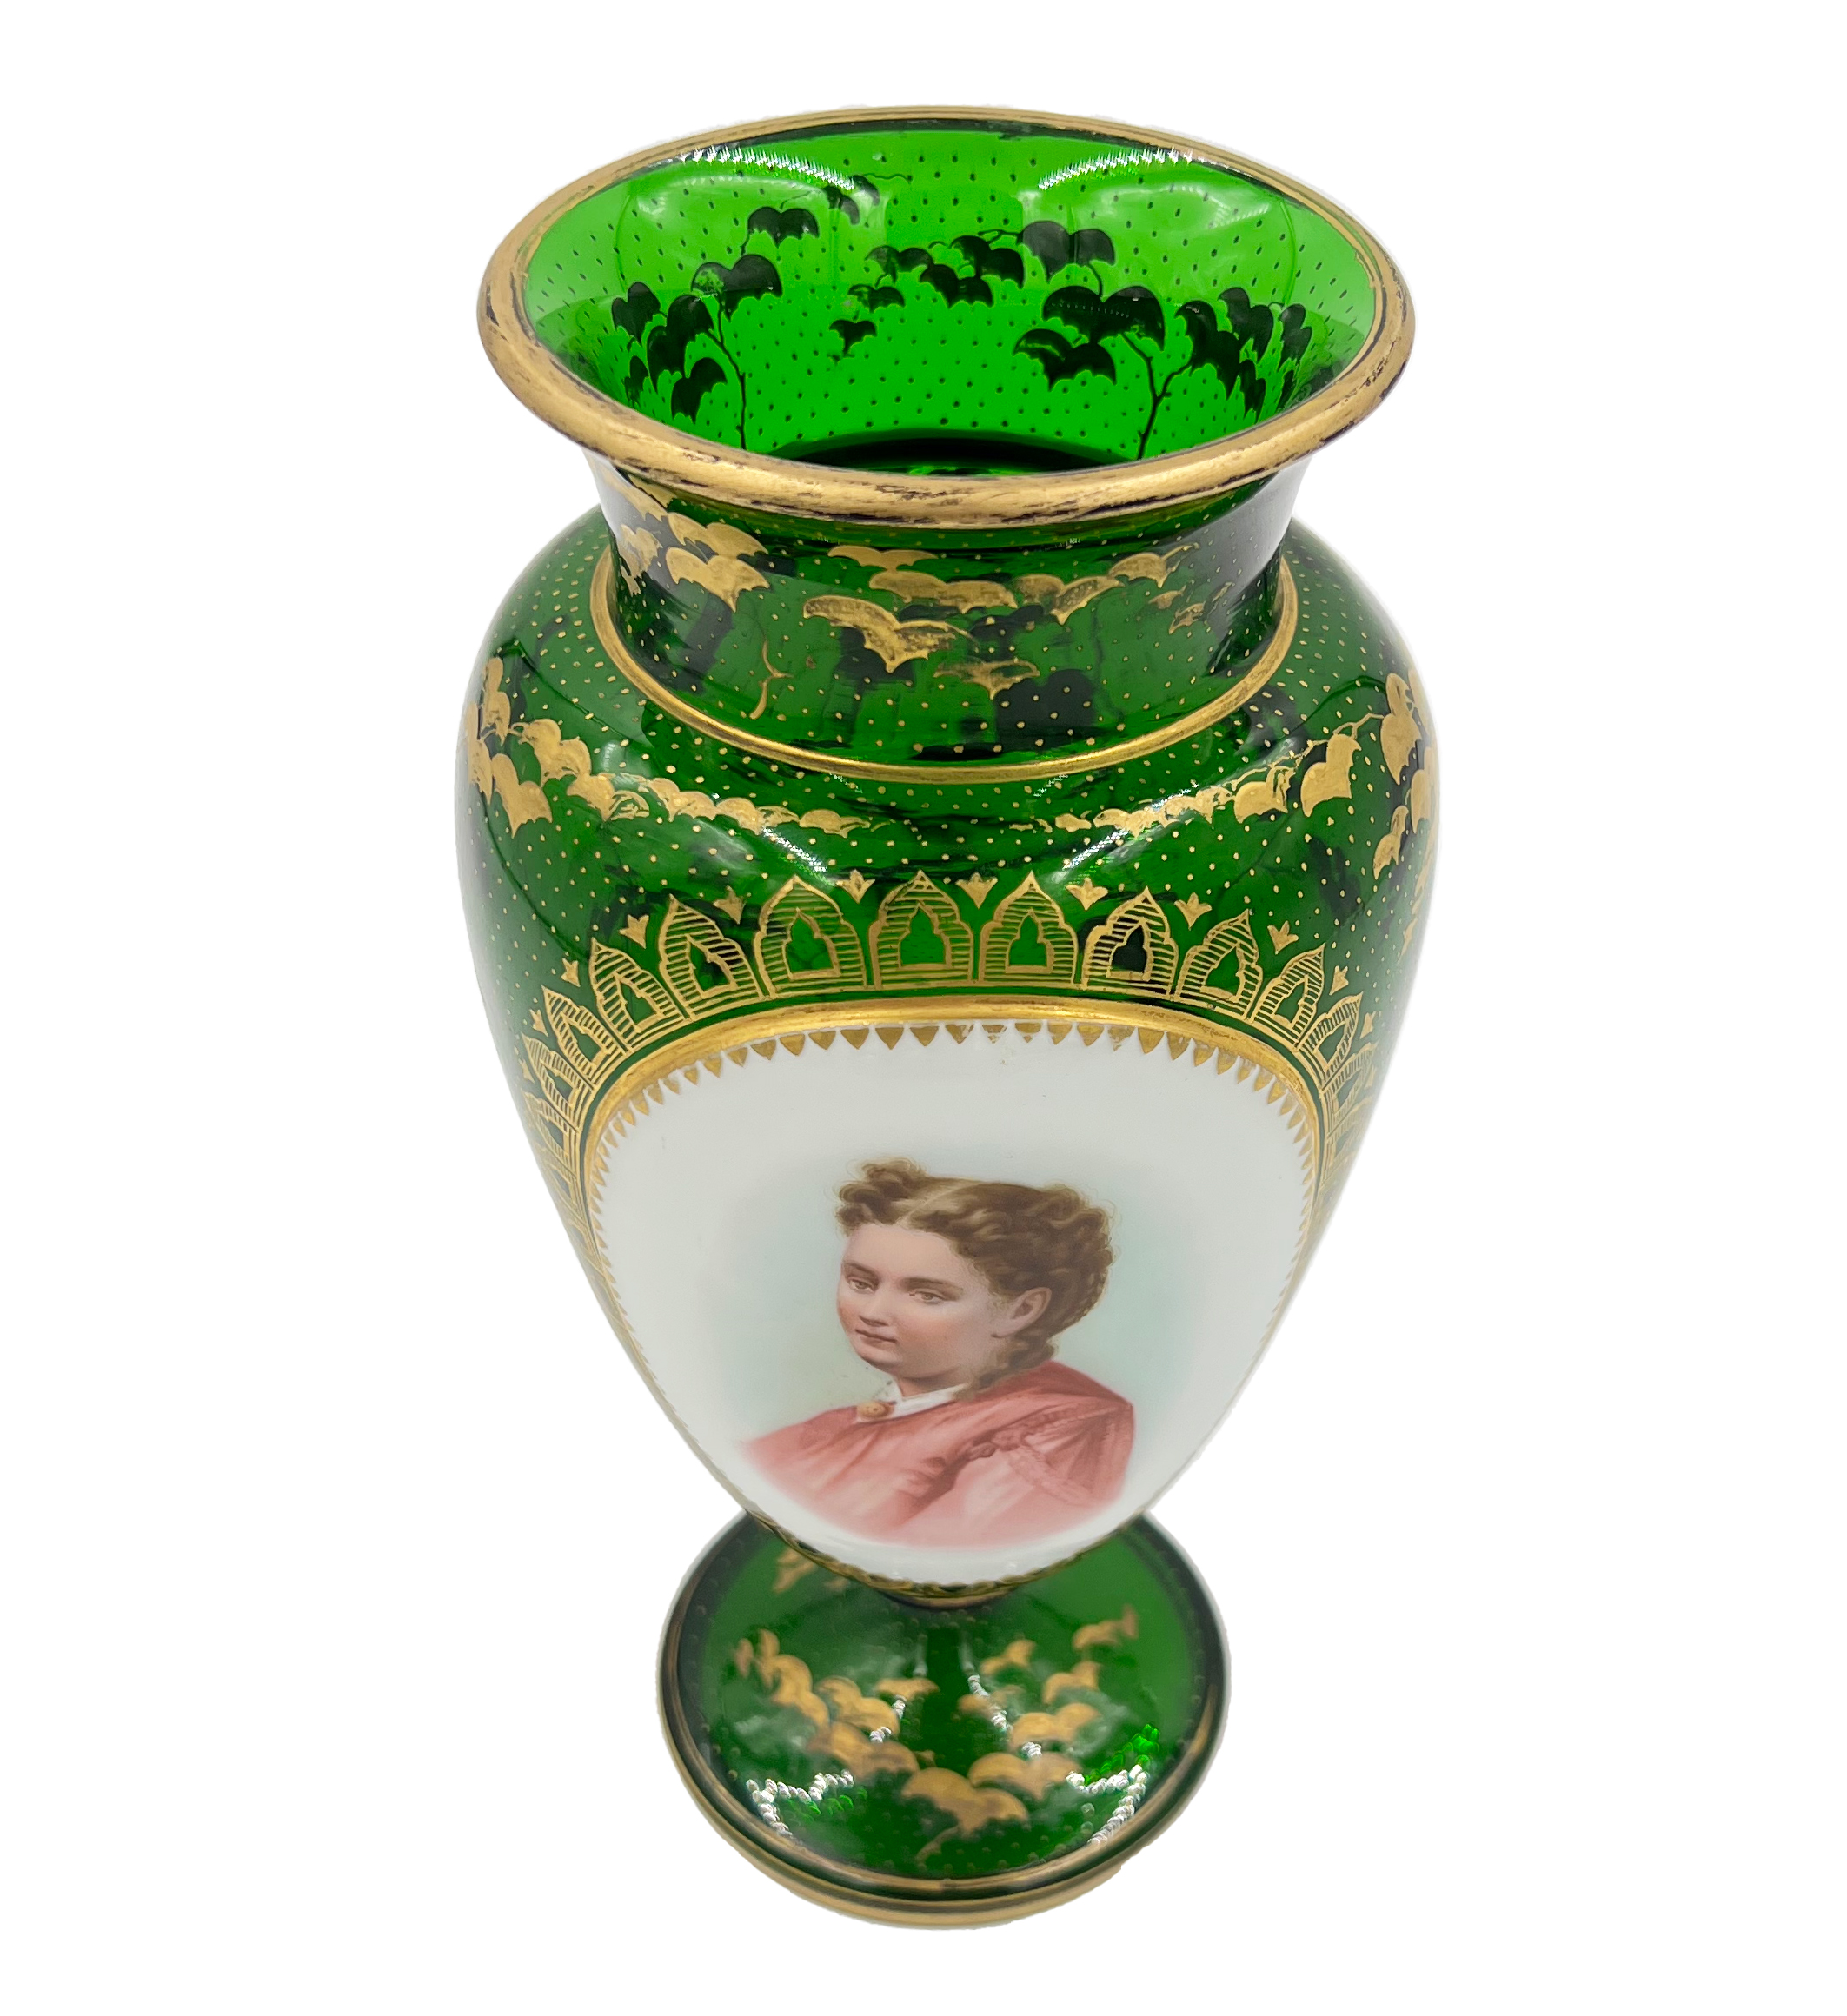 19TH CENTURY BOHEMIAN GLASS VASE WITH GOLD GILDING - Image 3 of 3